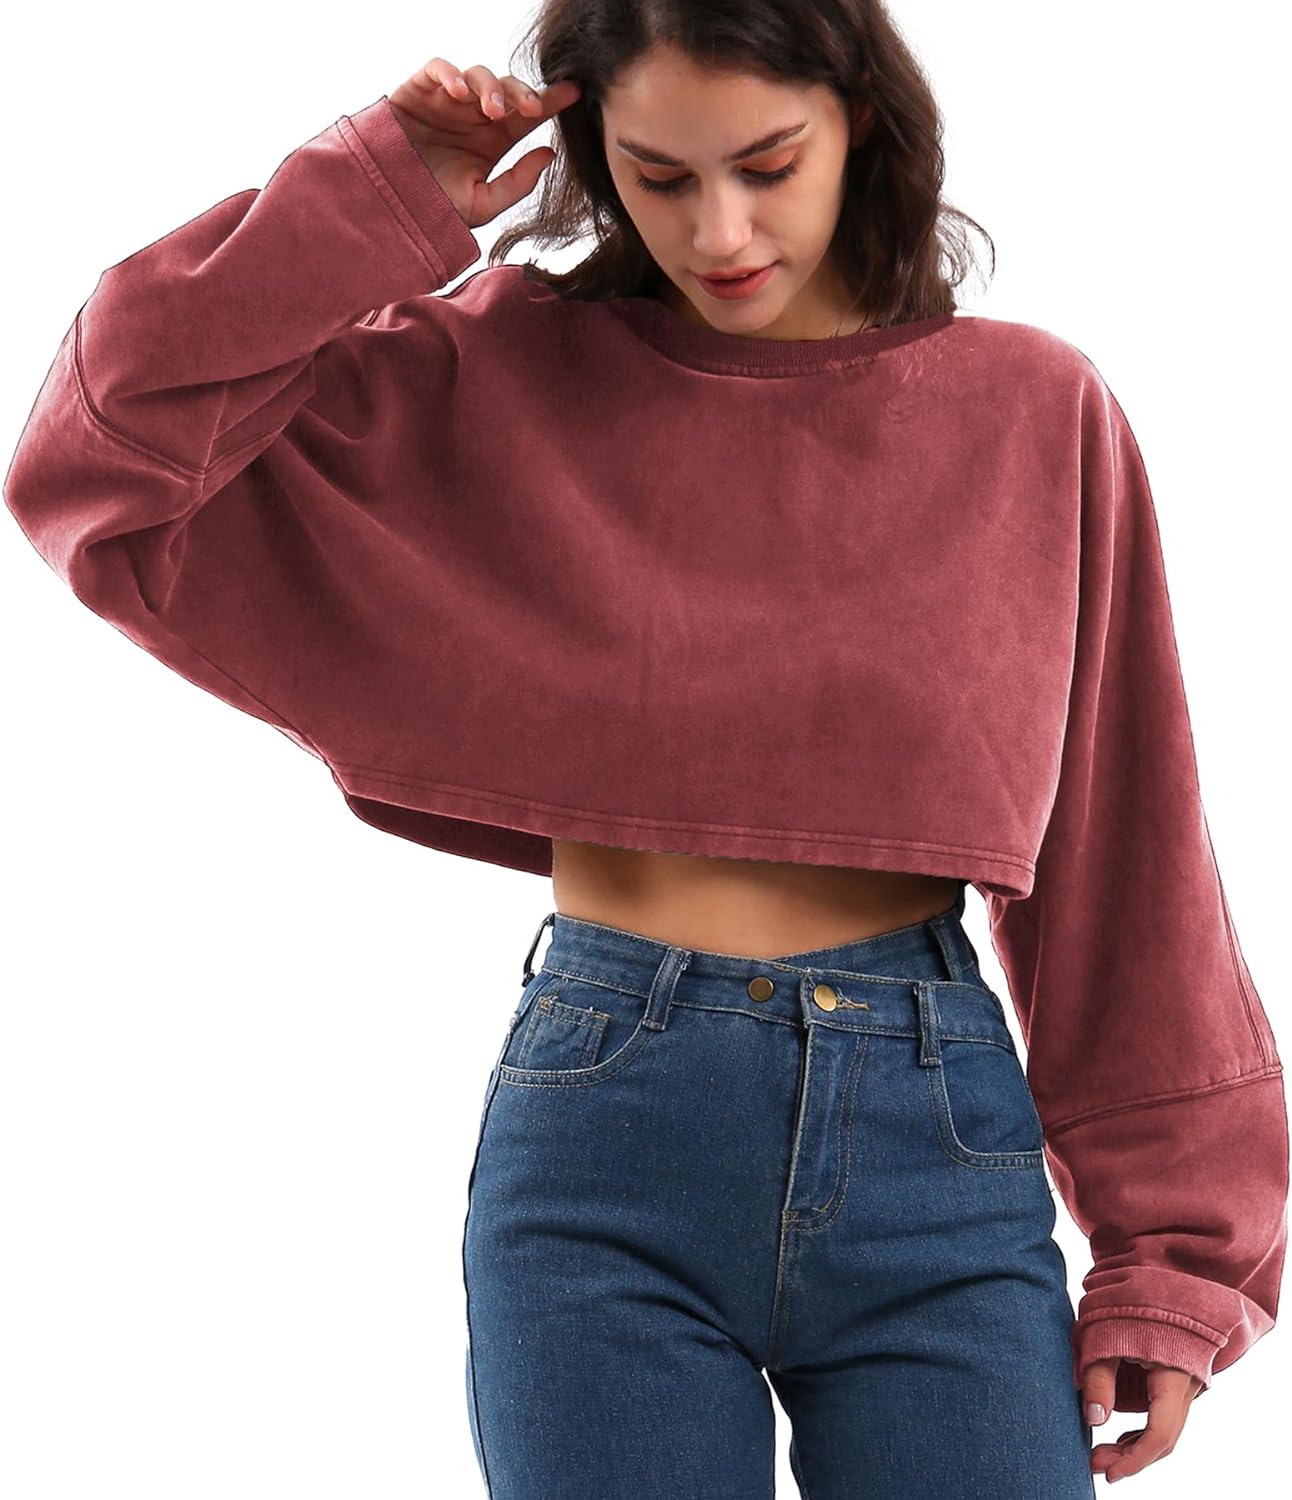 NTG Fad Dusty Rose / Small Washed High Cropped Sweatshirt Crew Neck Crop Top